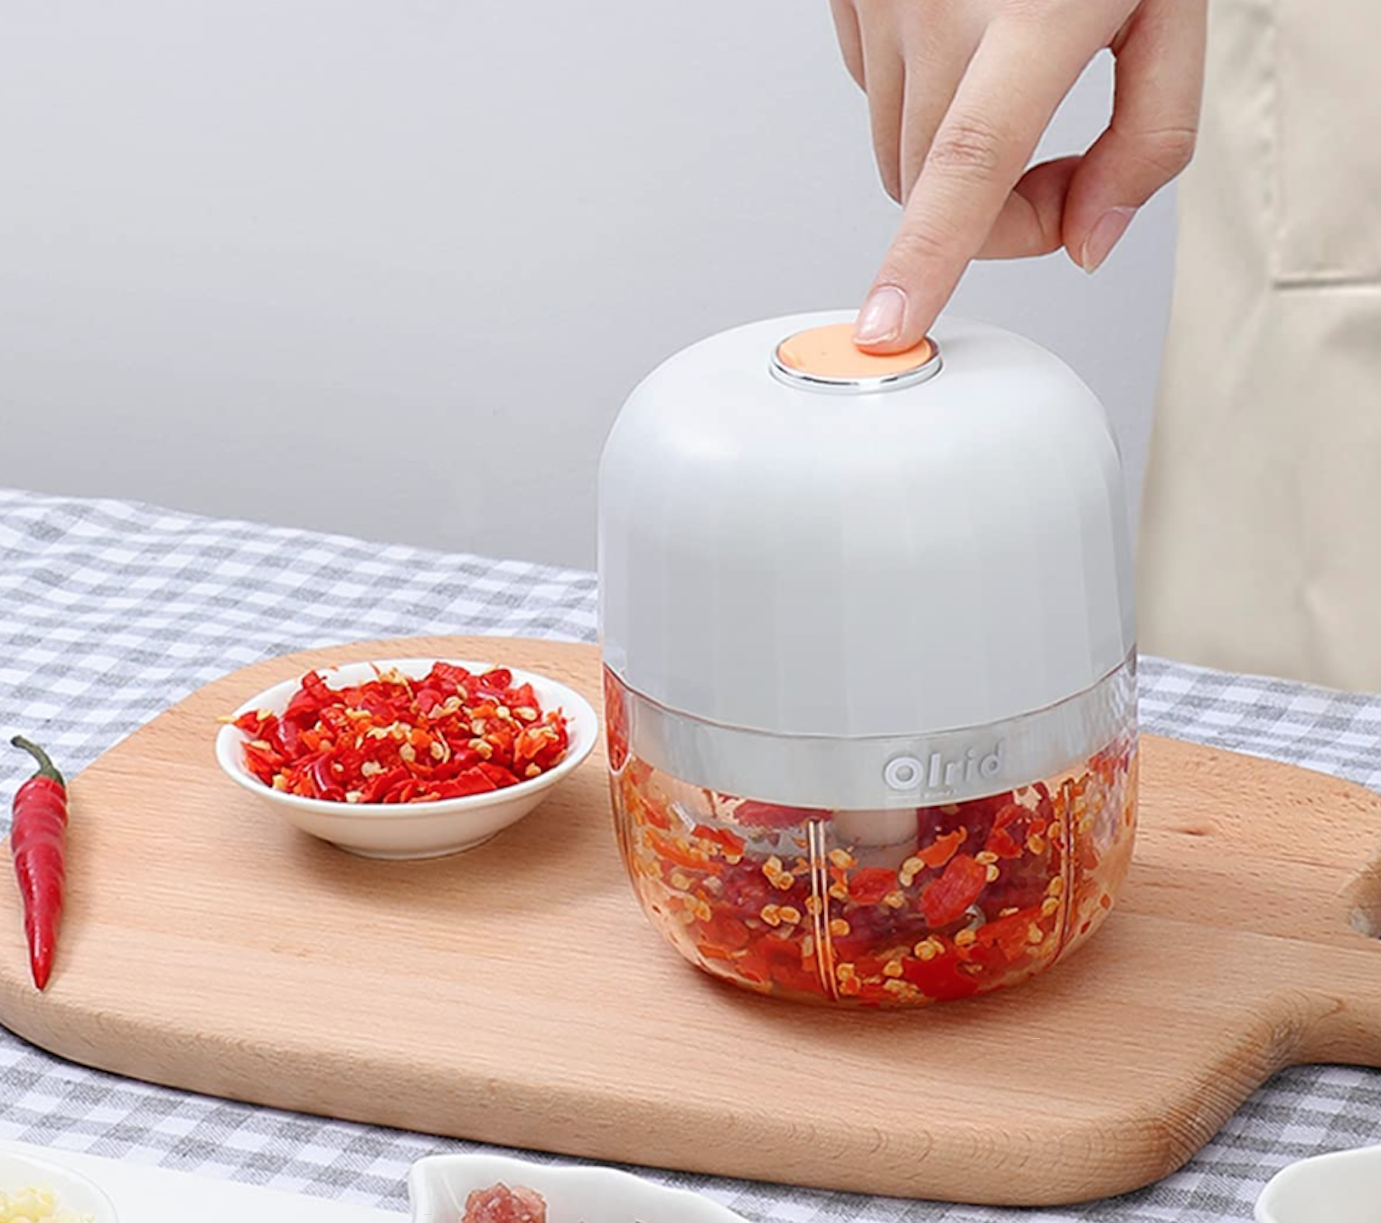 Aldi Food Chopper £4.99p Unboxing and review 